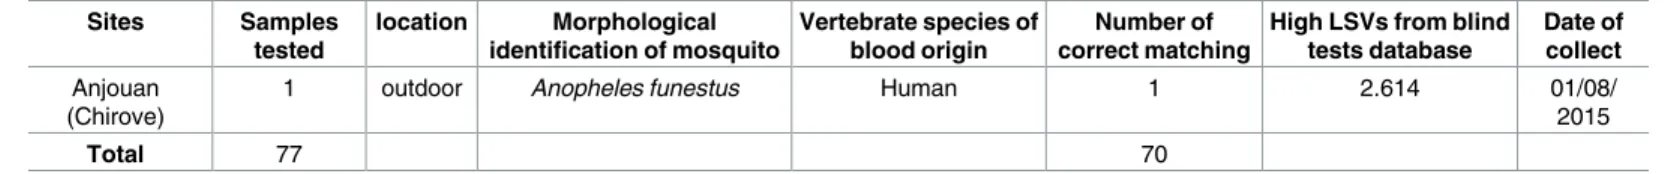 Table 3. (Continued) Sites Samples tested location Morphological identification of mosquito Vertebrate species ofblood origin Number of correct matching